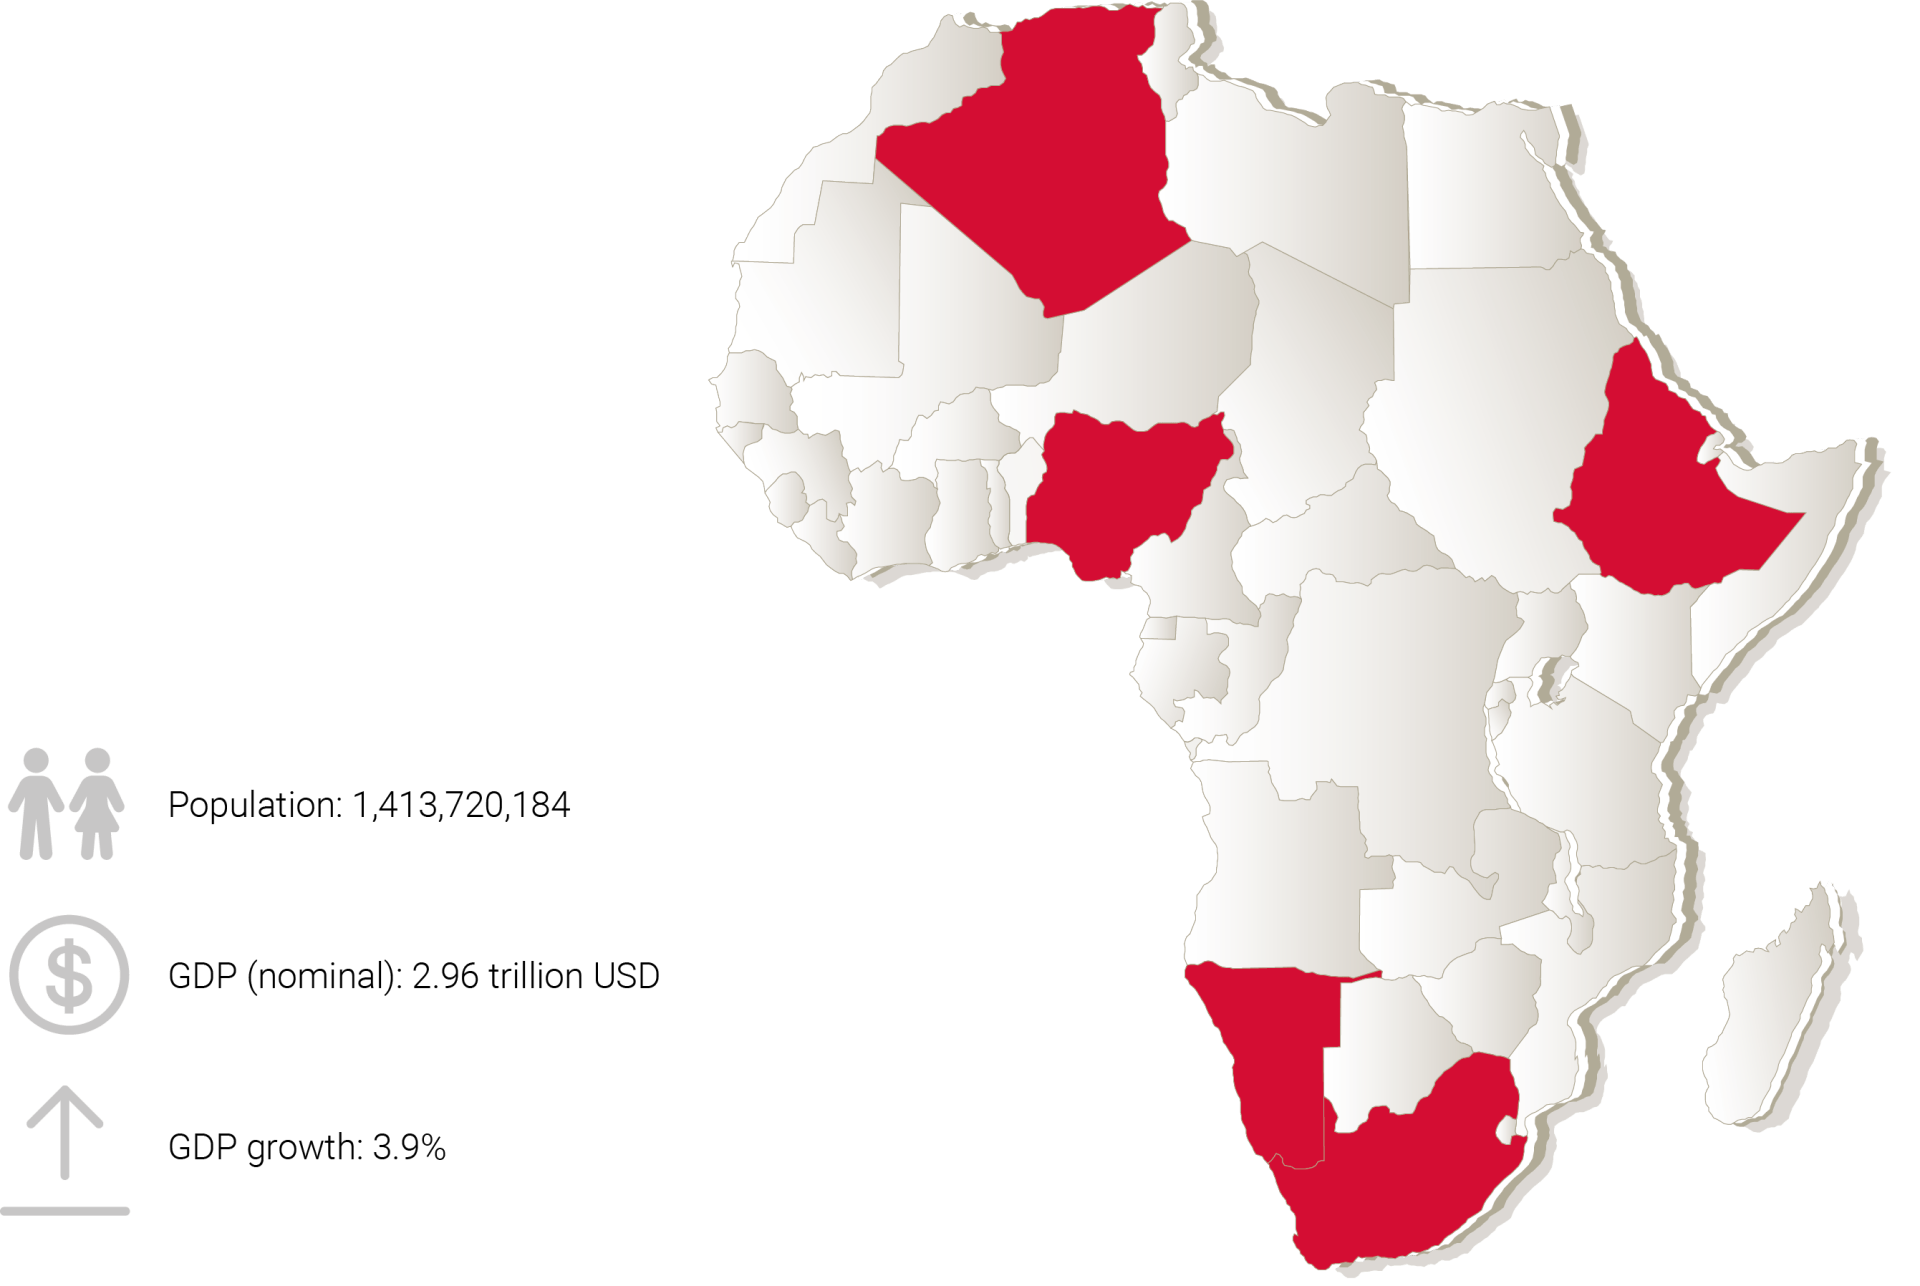 Map of Africa showing 5 key countries